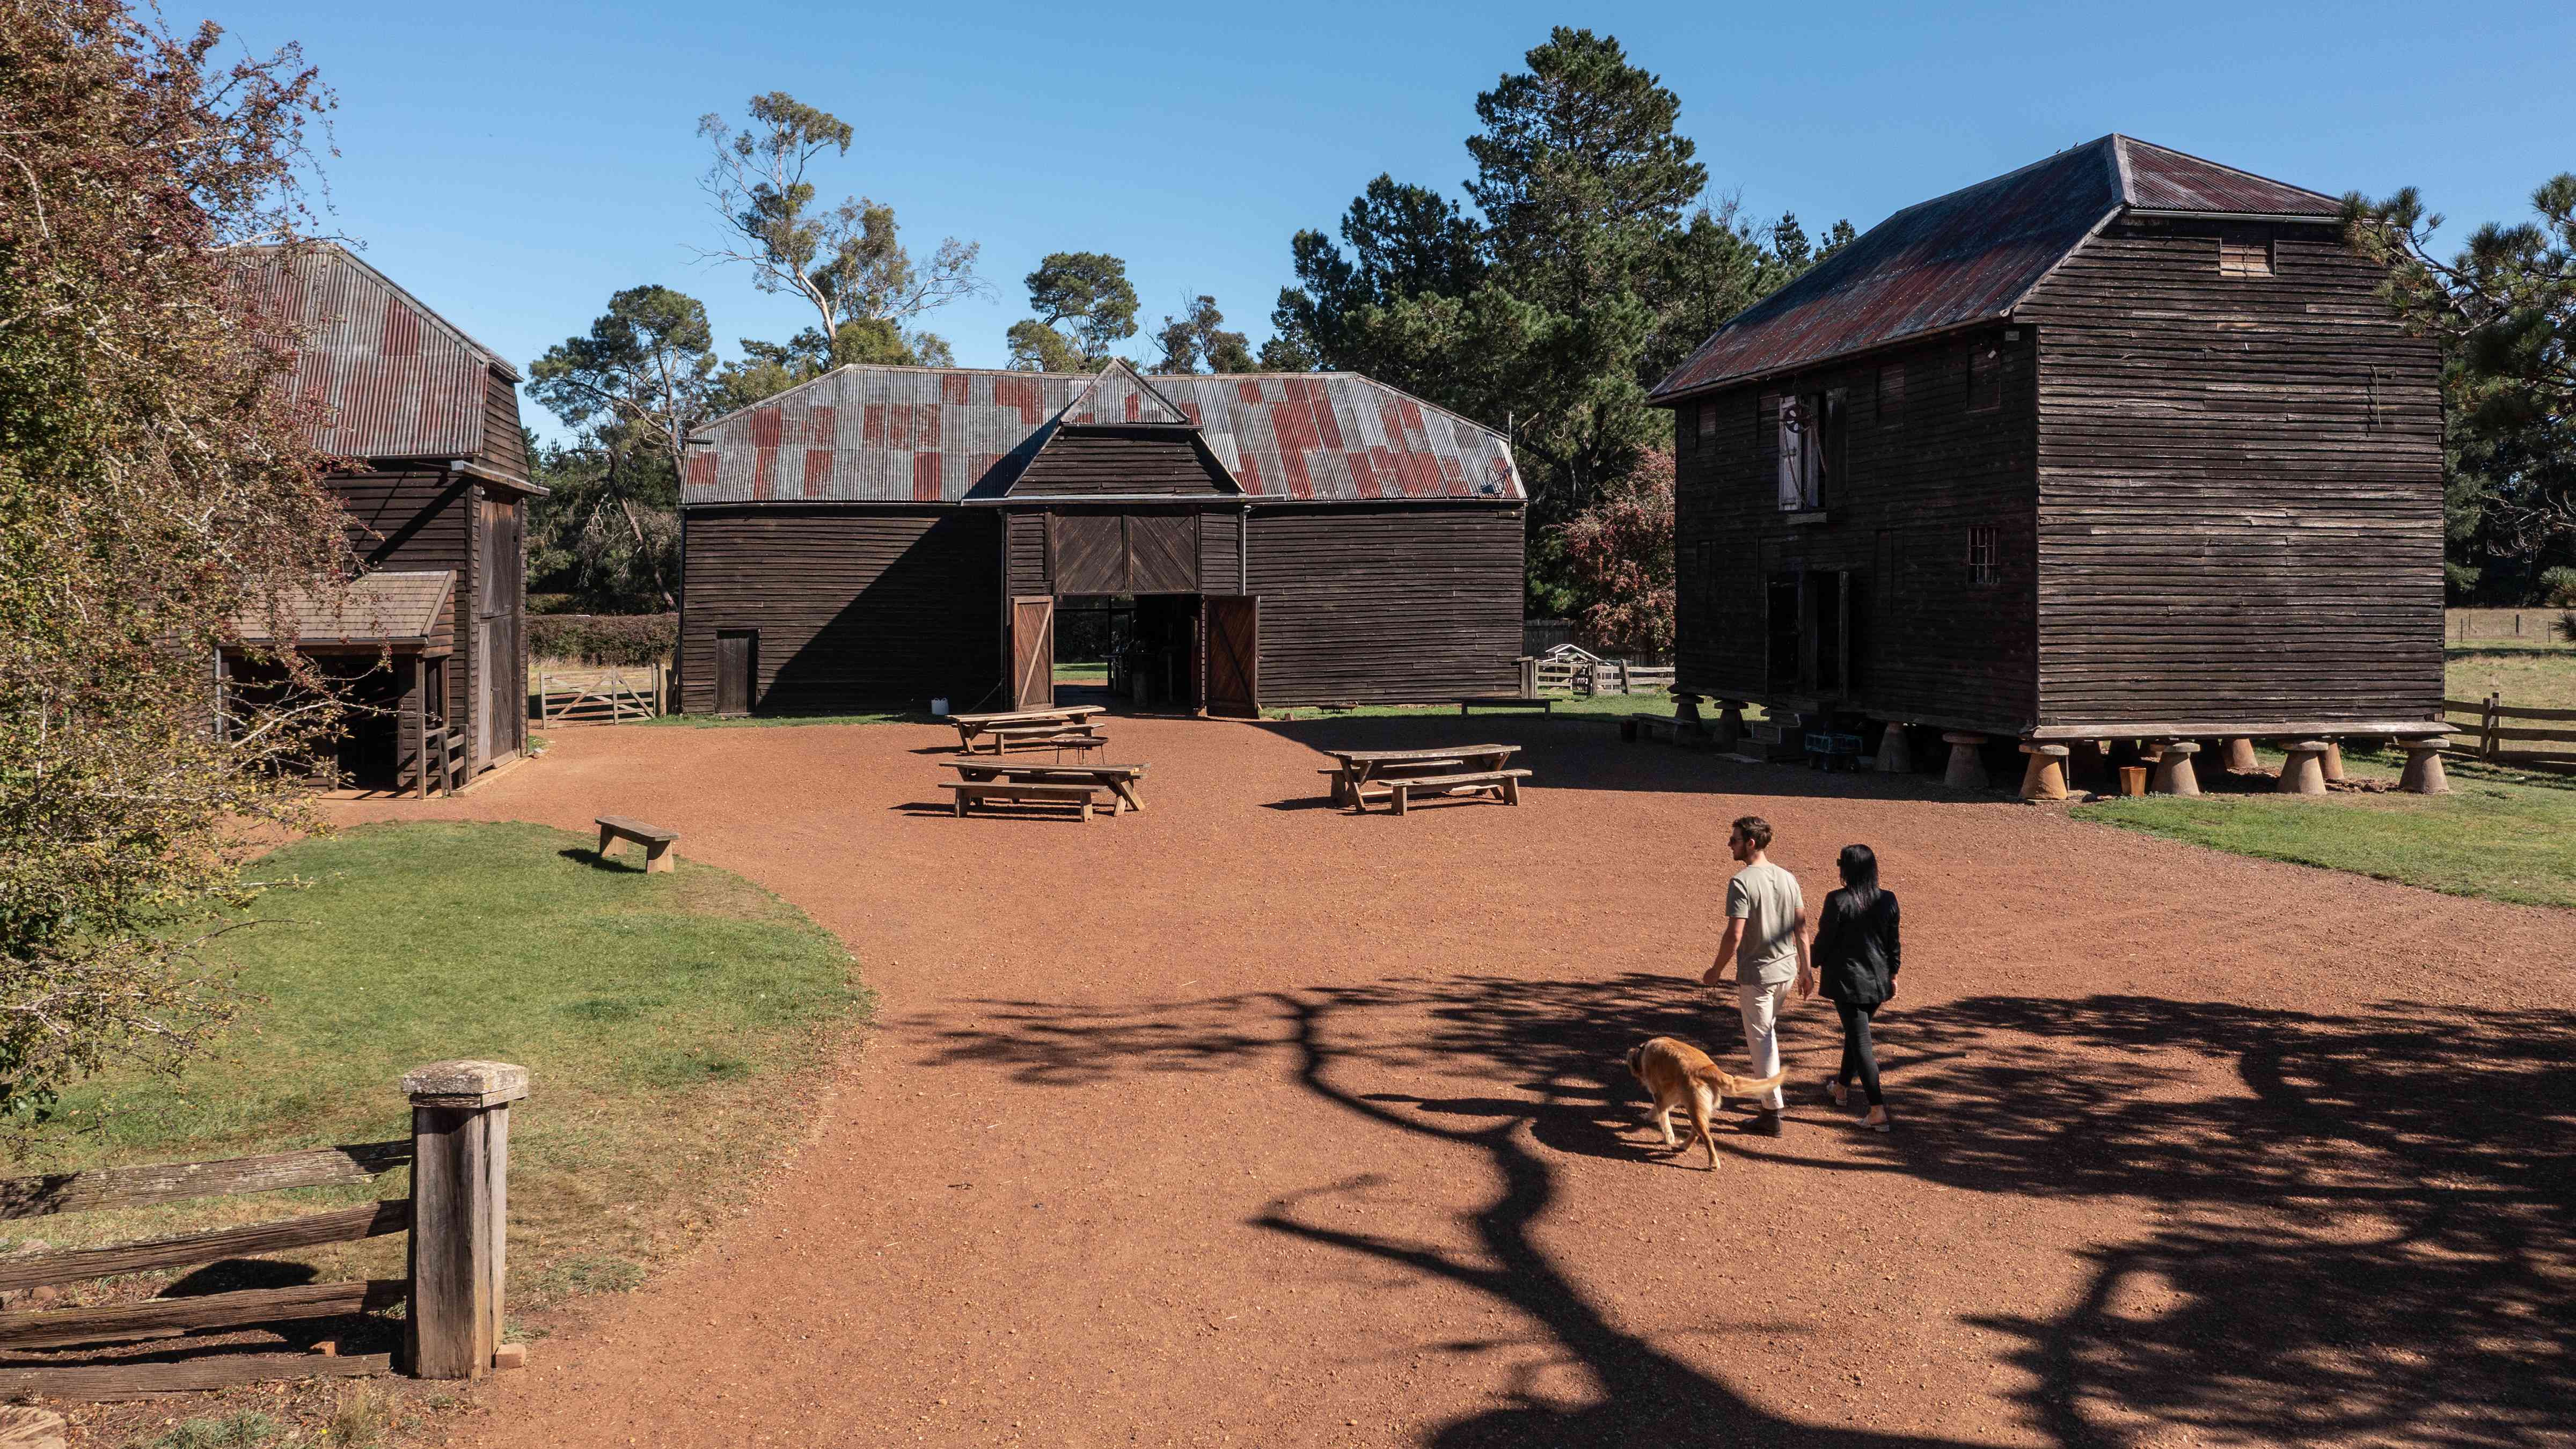 Two people and a dog are wandering into the quadrangle which is surrounded by the Sussex and Village barns and the Pillar granary.  The quad is gravel with 3 timber picnic tables in the centre. Photo: Kate von Stieglitz / Tourism Australia.